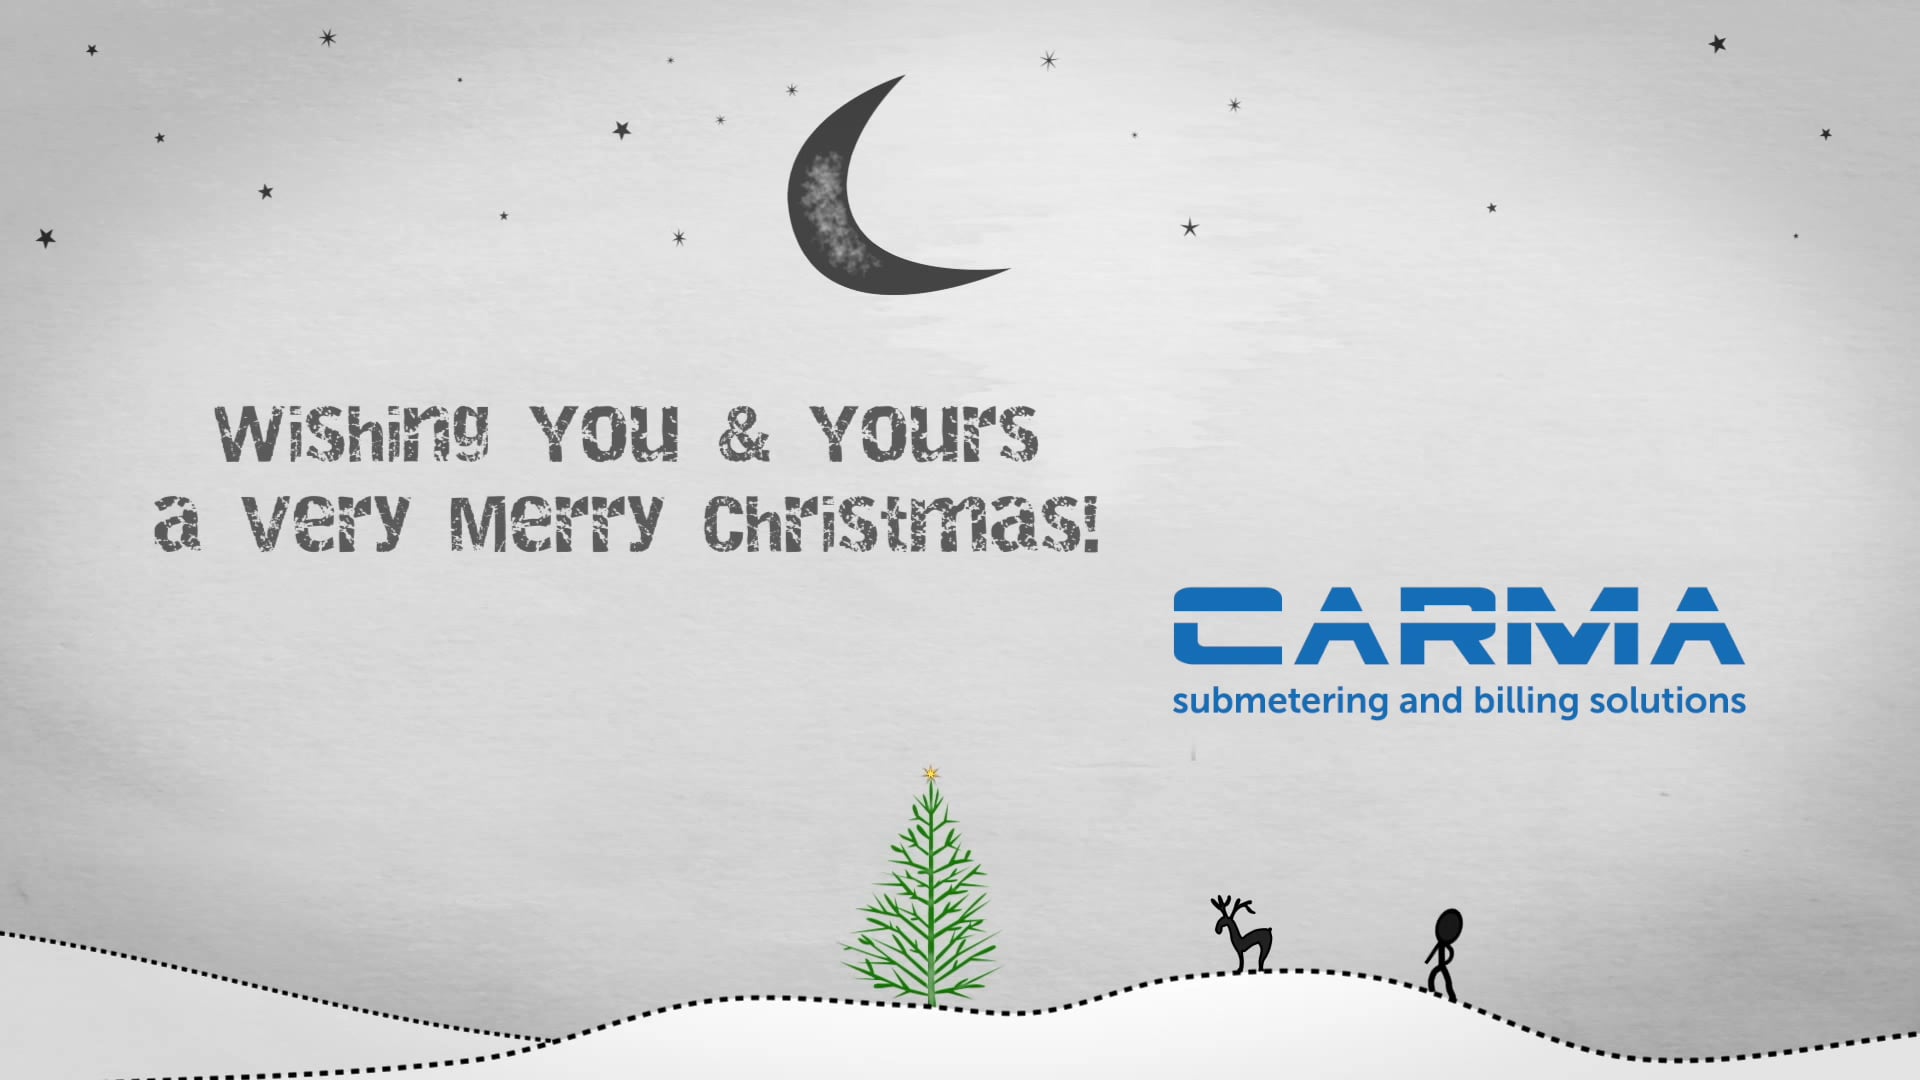 Happy Holidays from CARMA INDUSTRIES